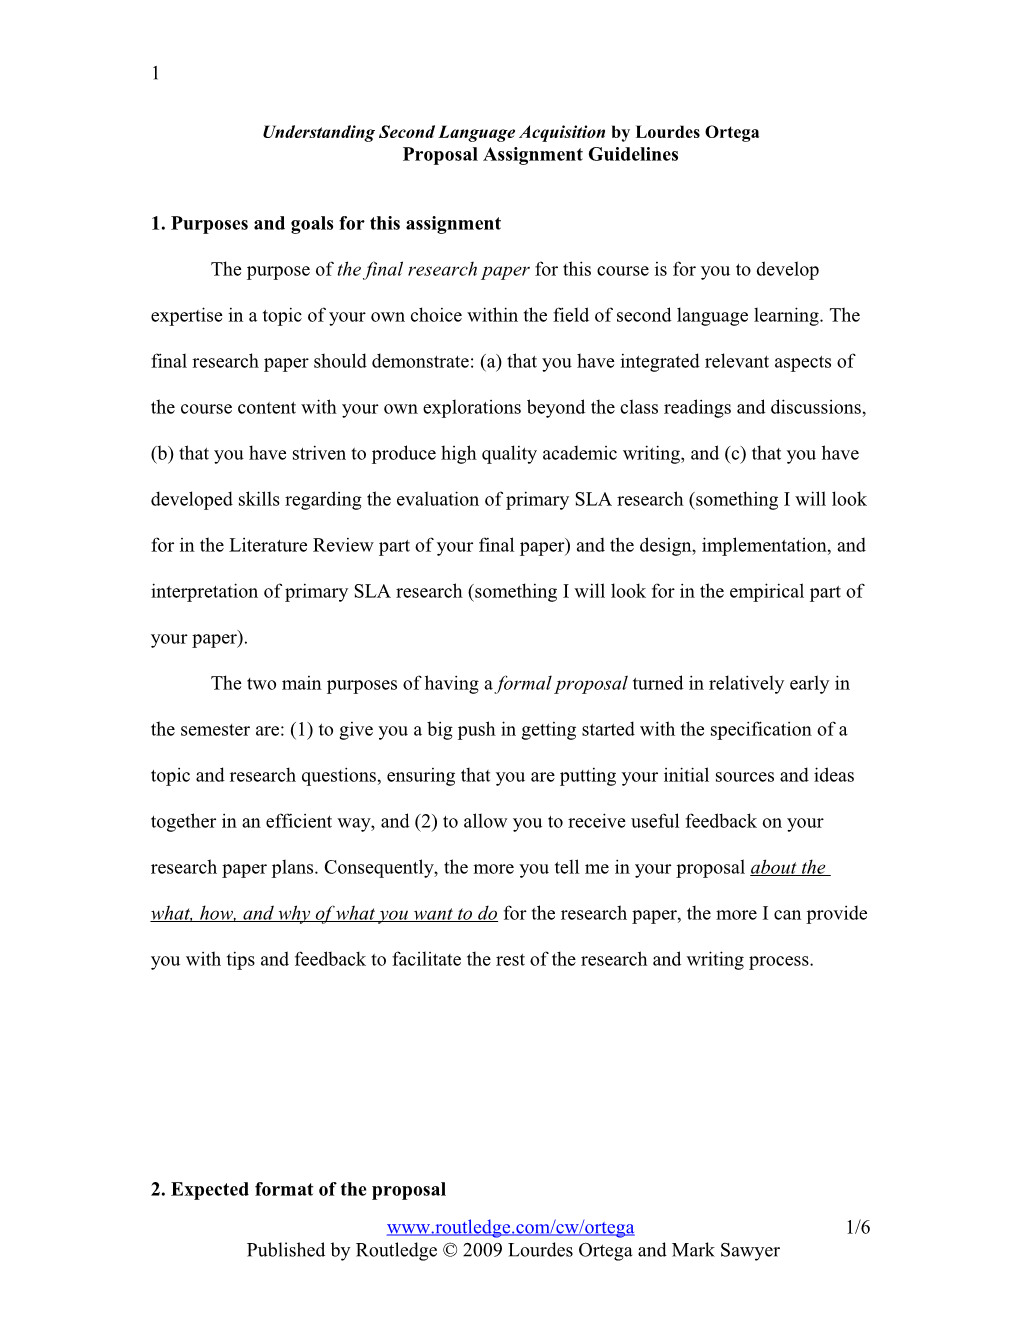 Proposal Assignment: Guidelines